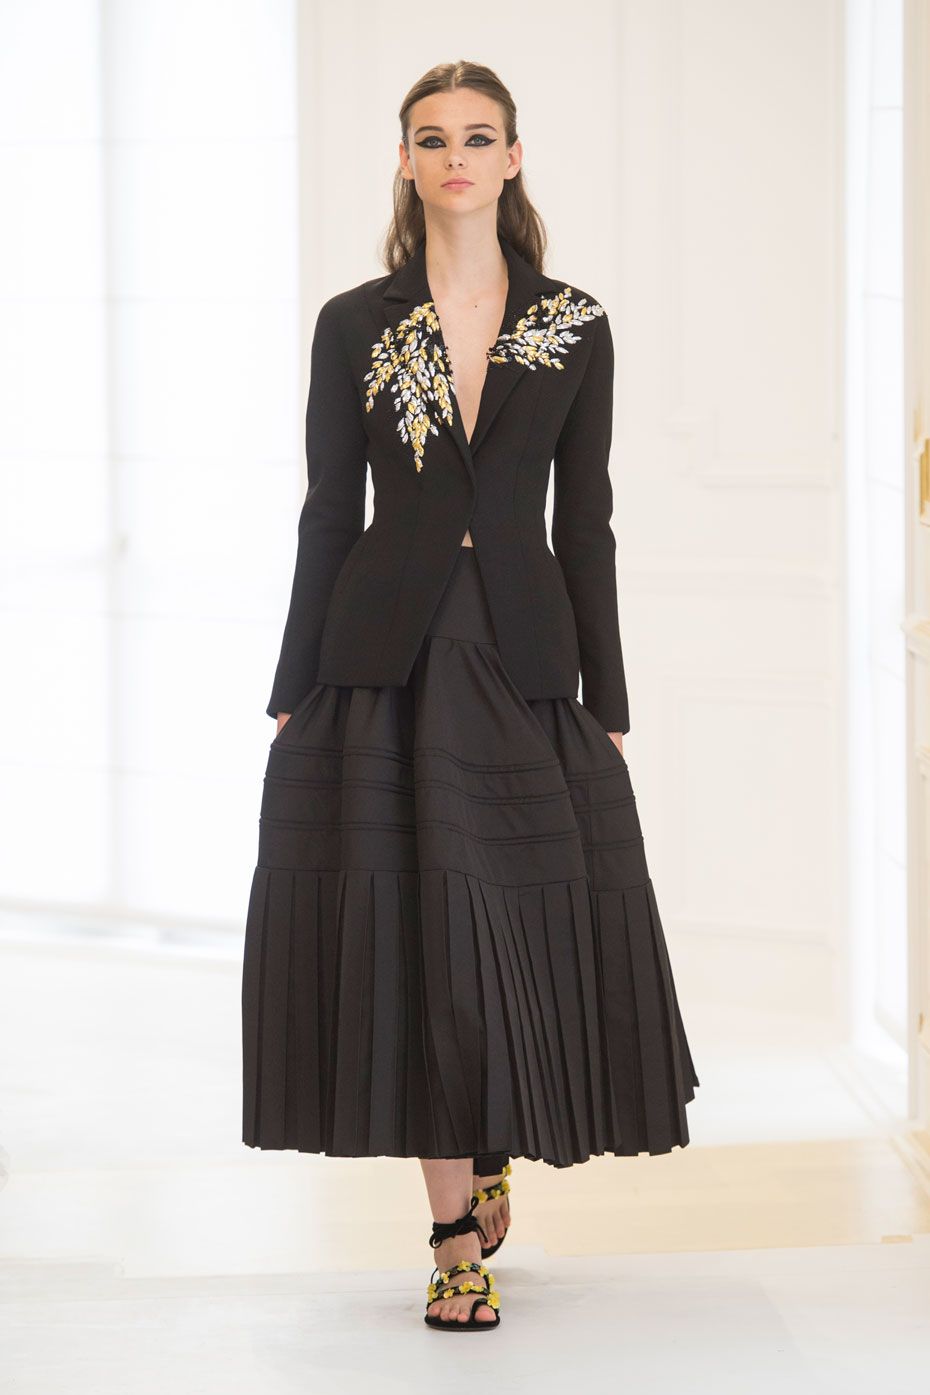 Dior Couture autumn/winter 2016 show pictures